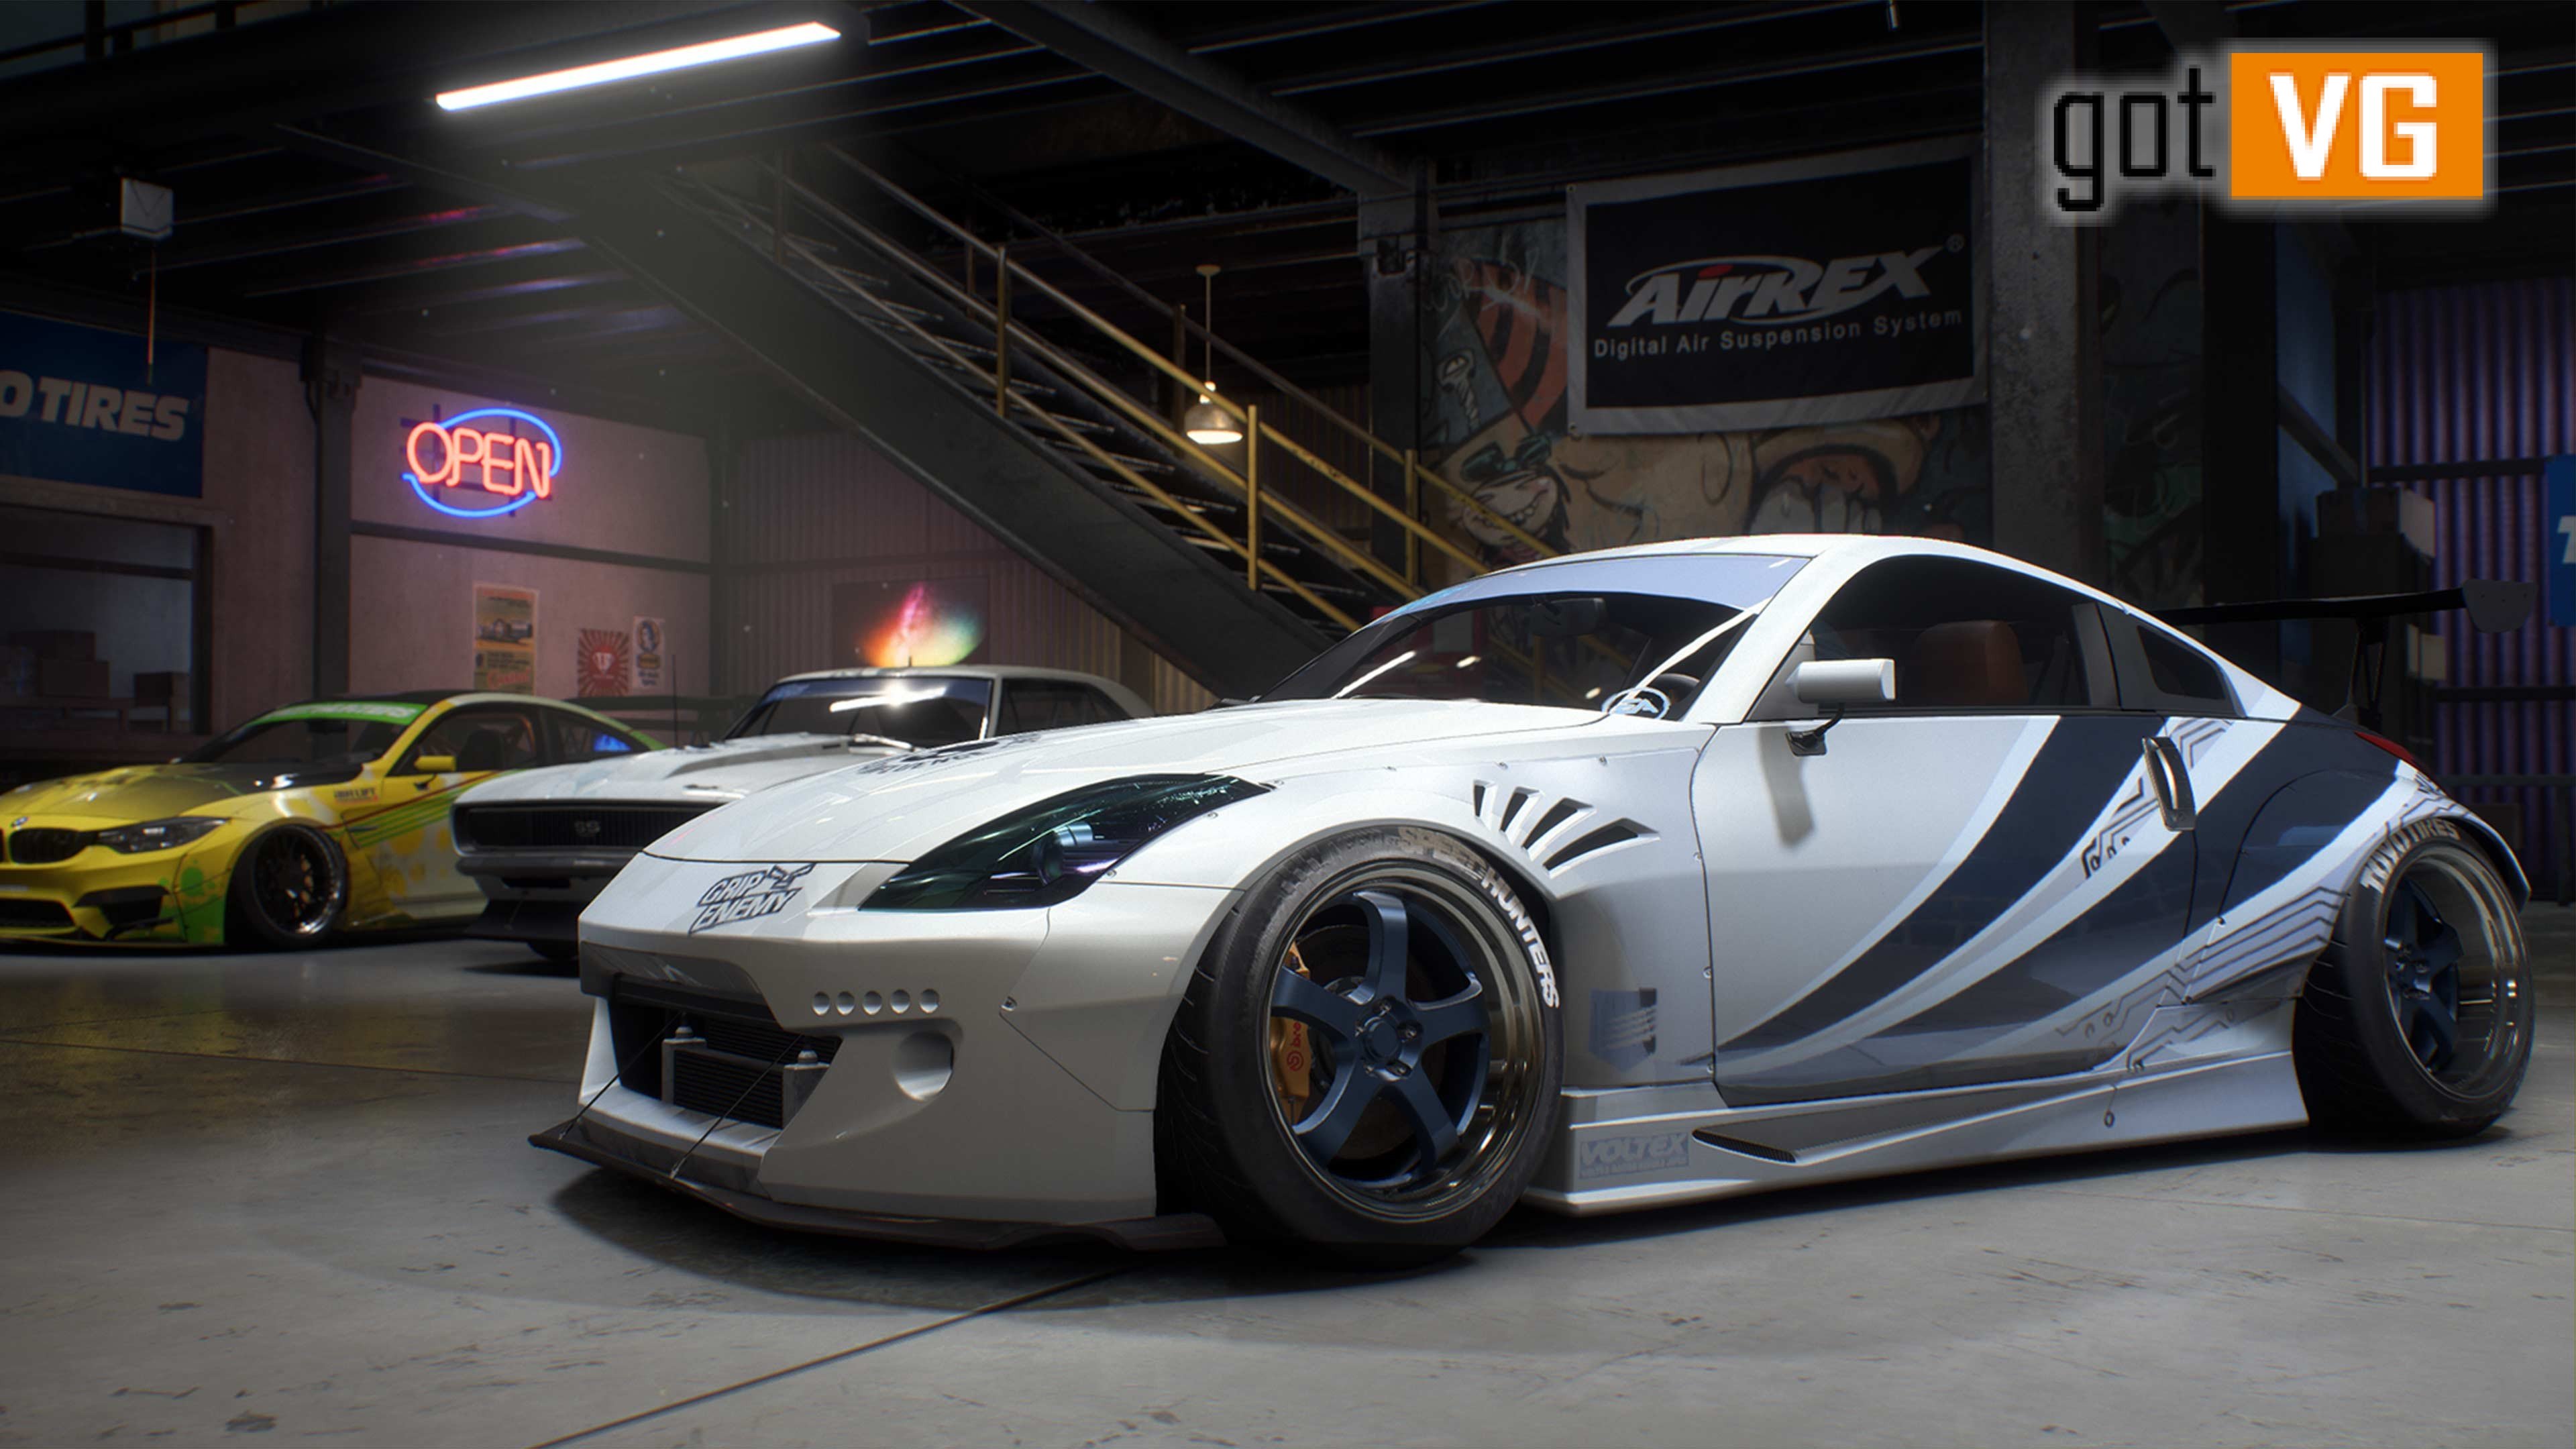 Need for speed playback